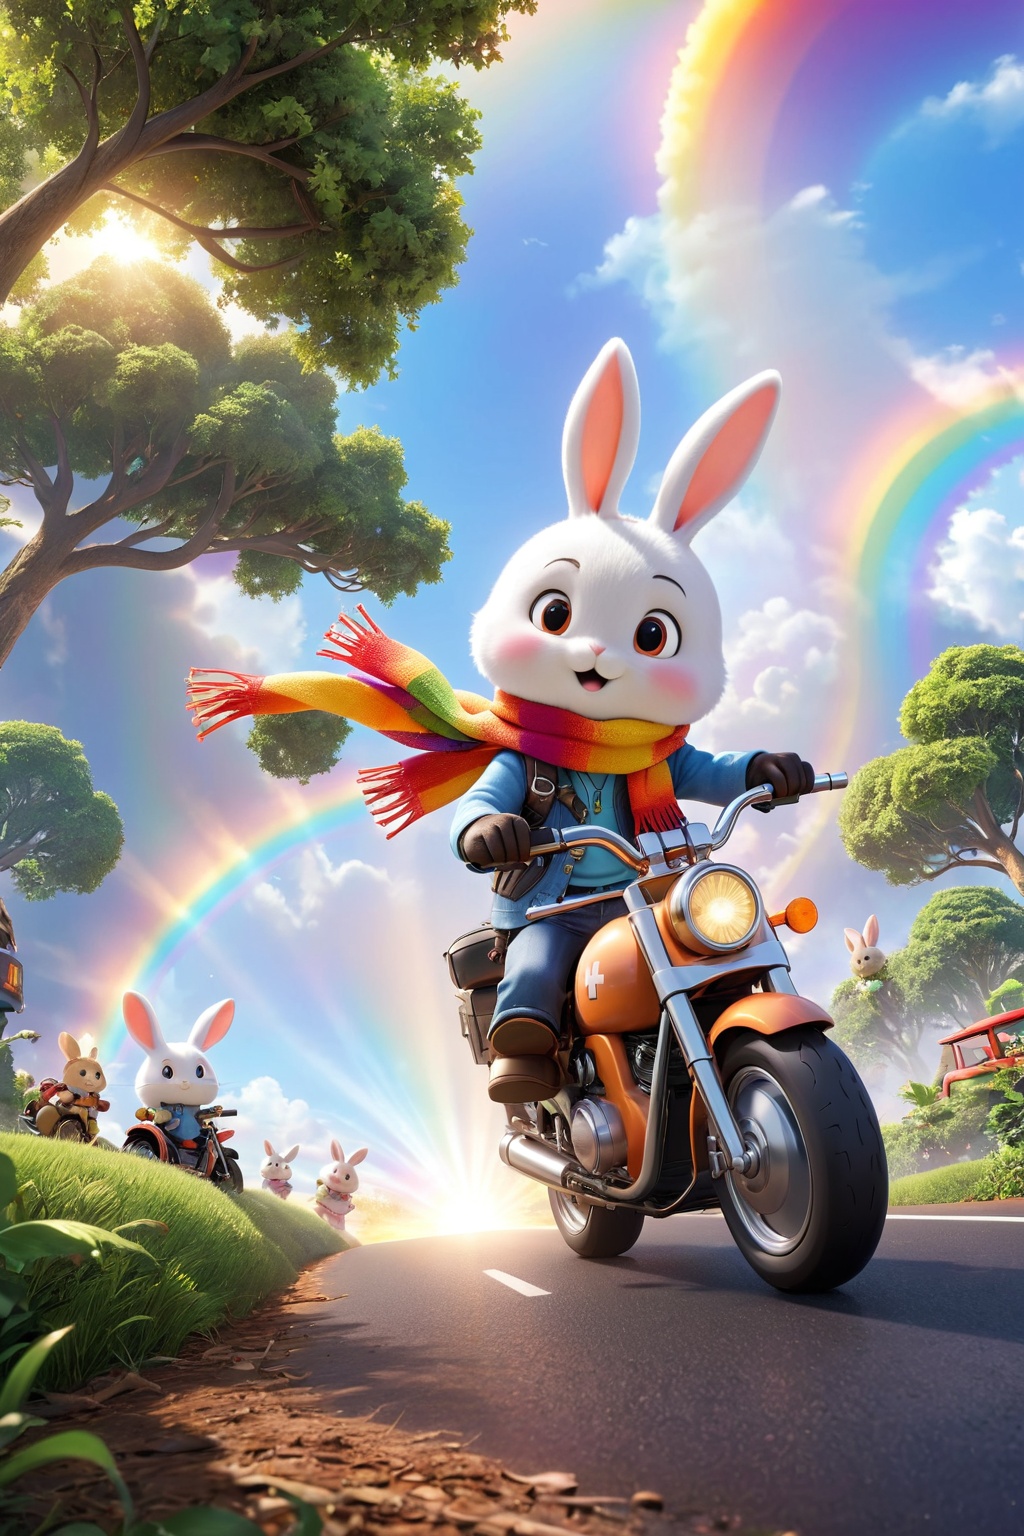 professional 3d model,anime artwork pixar,3d style,good shine,OC rendering,highly detailed,volumetric,dramatic lighting,furry,cute,(a bunny riding a motorcycle:1.1),rabbit,solo,(motor vehicle:1.2),riding,scarf,running on the rainbow,tree,extreme perspective,looking up at the camera,rainbow,fire spray,speed,humorous,beautiful colorful background,very beautiful,masterpiece,best quality,super detail,anime style,key visual,vibrant,studio anime